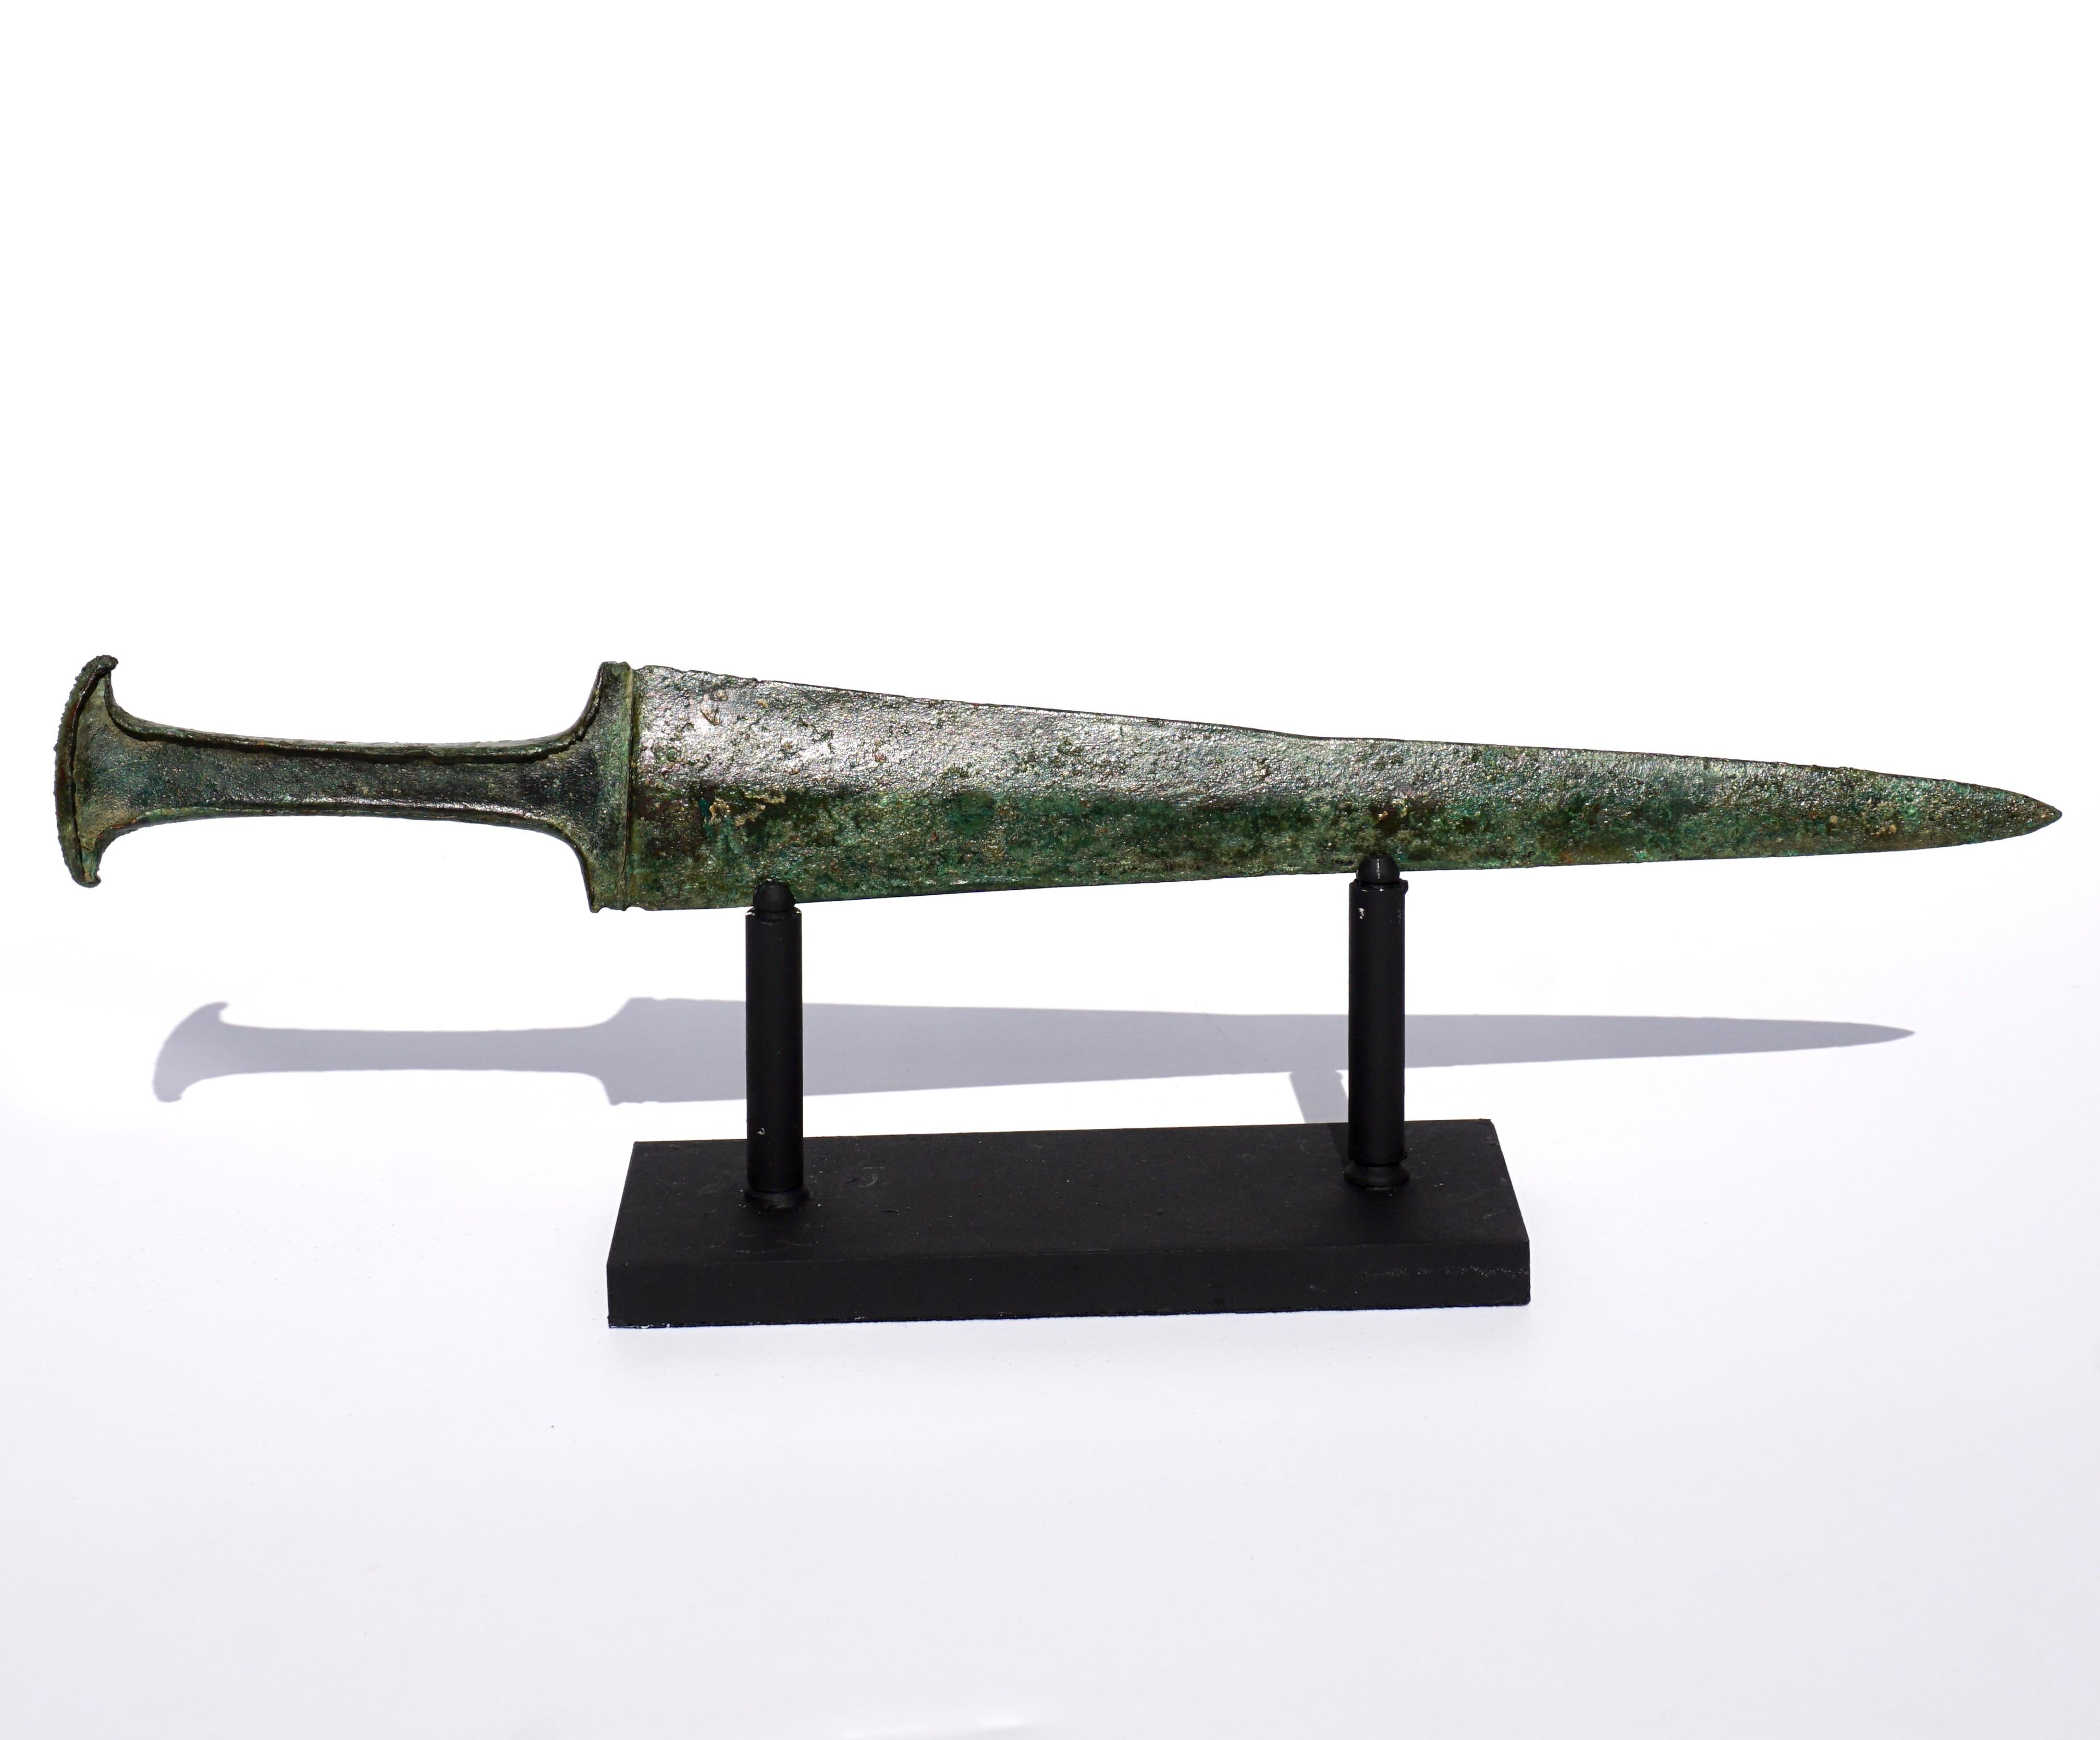 2000-700 BC. Luristan (Louiristan) Culture. Bronze dagger with a bevelled leaf-shaped blade and wrap-around handle culminating in an oval-shaped pommel. The handle would originally have been reinforced with a wooden insert. 

Bronze weaponry